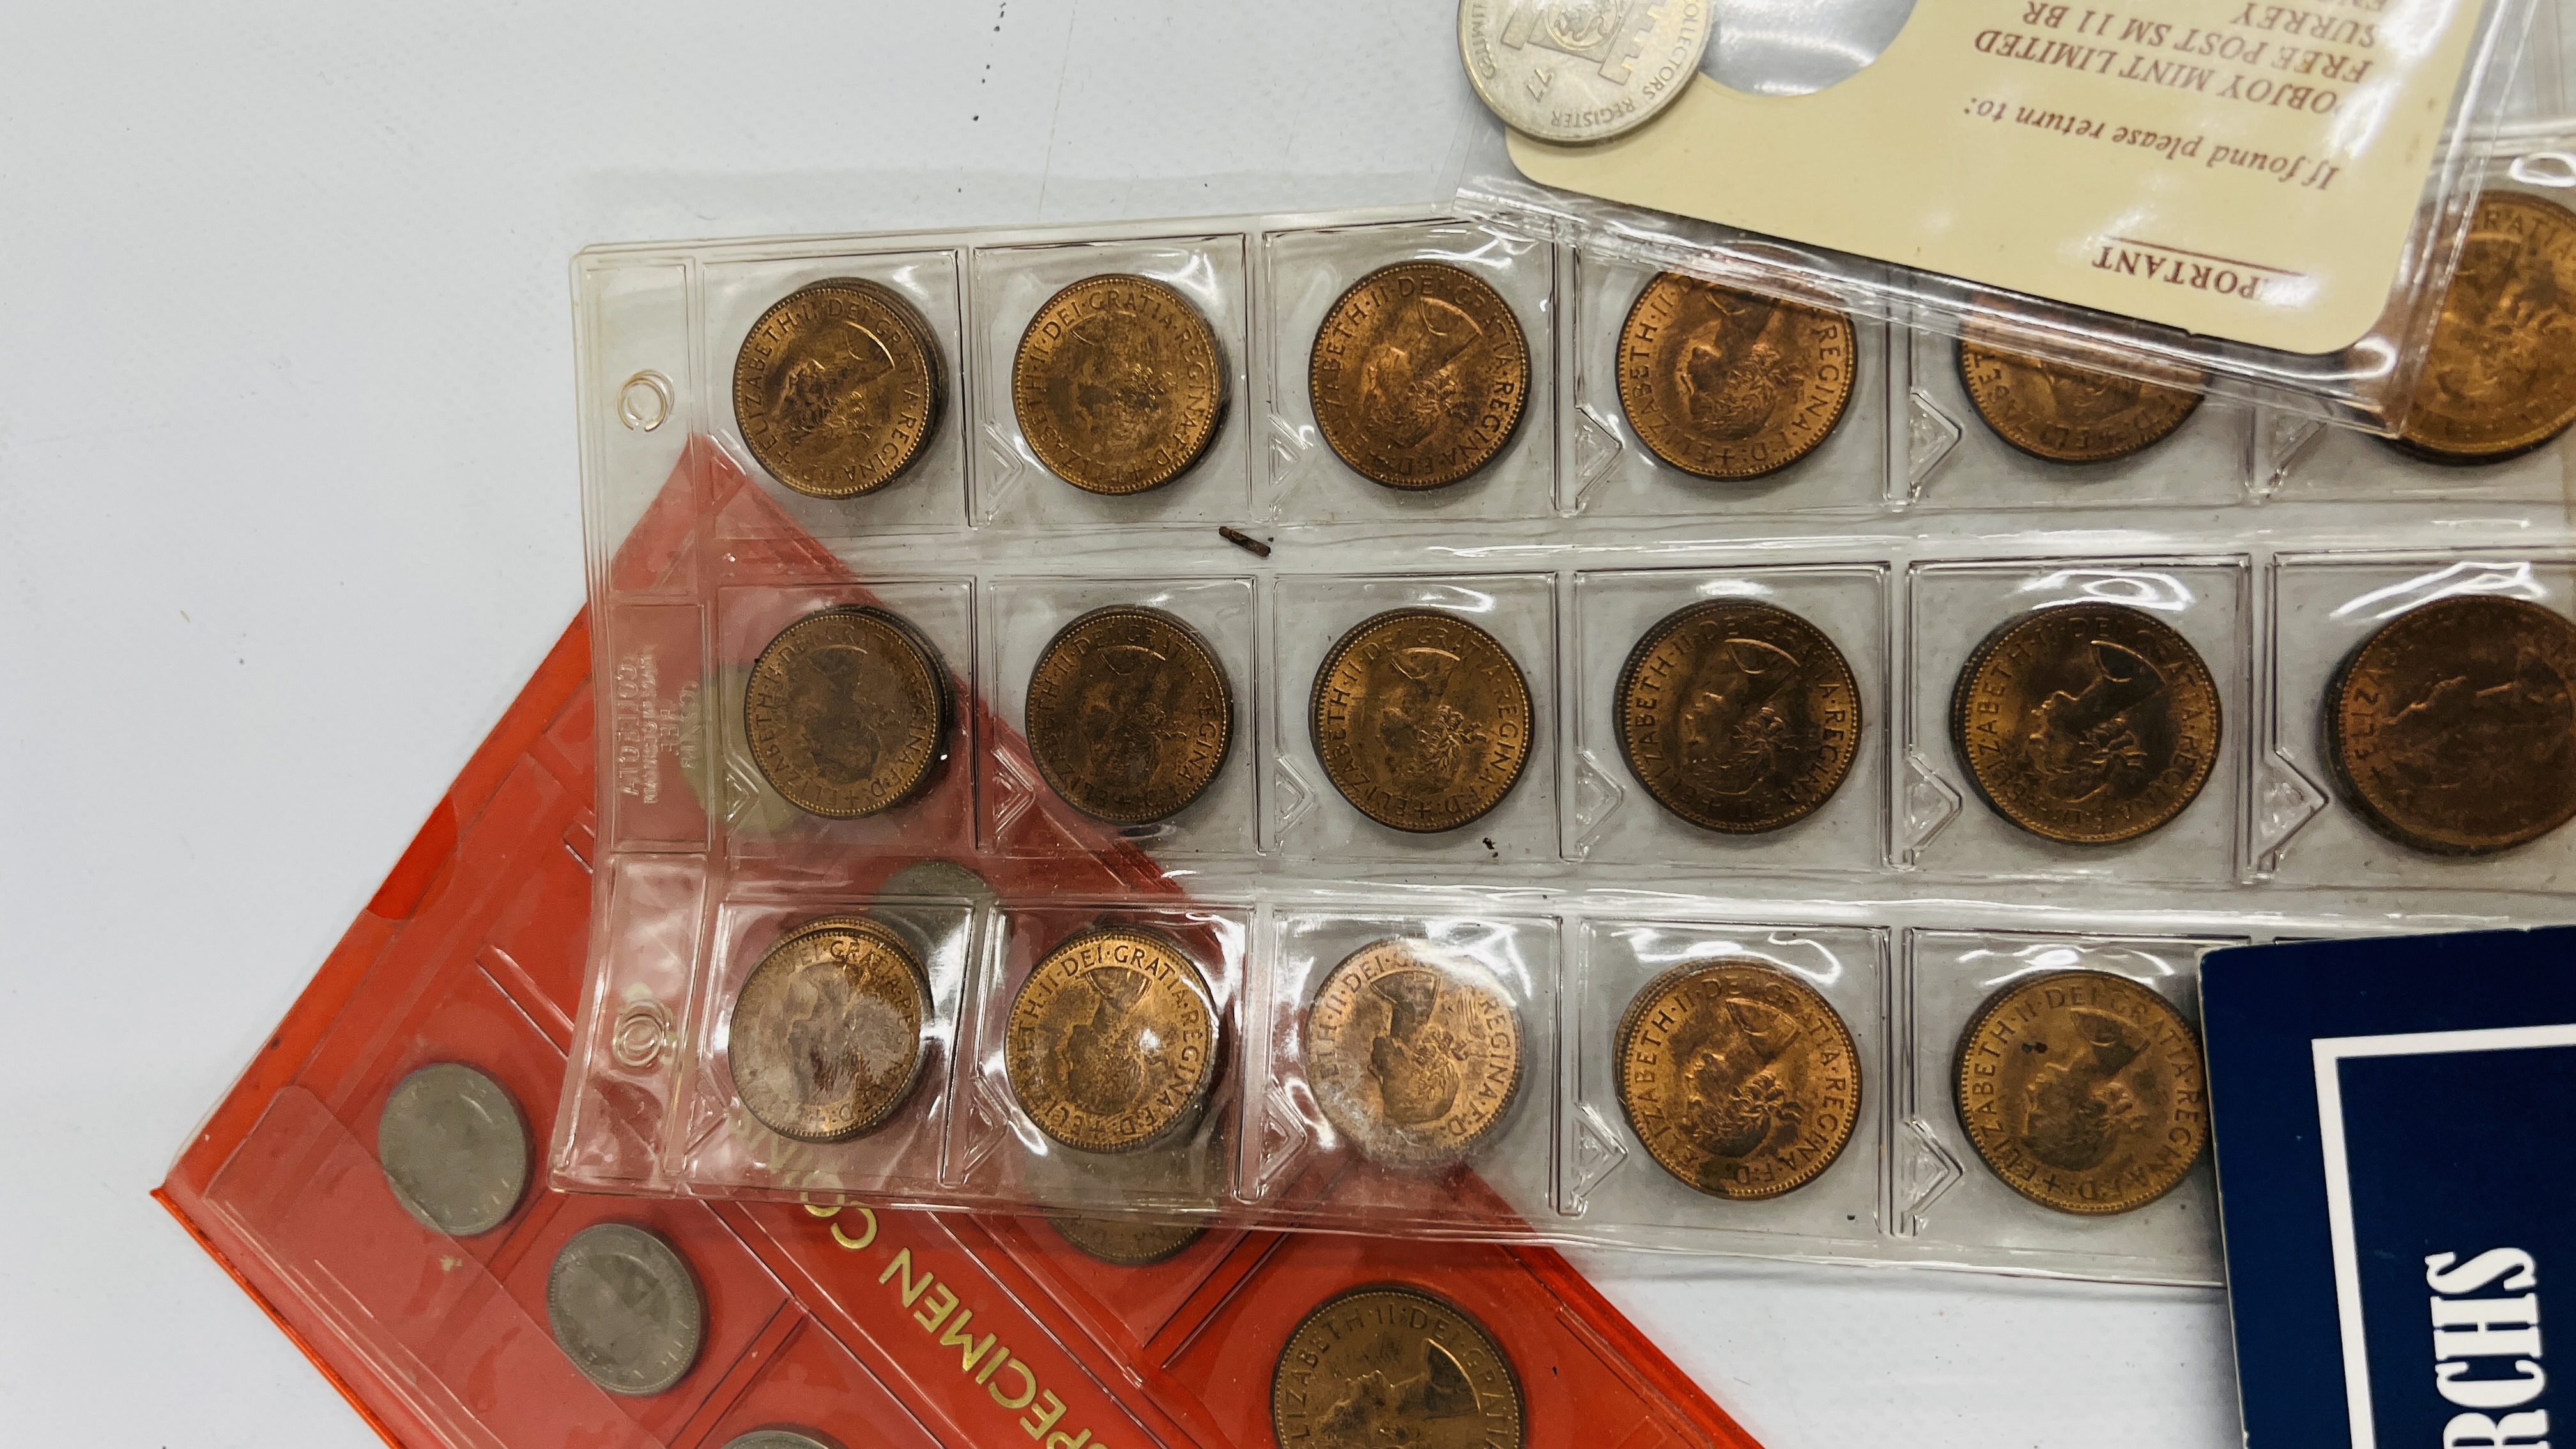 A BLUE TUB CONTAINING QUANTITY OF COIN SETS AND MEDALLIONS. - Image 4 of 11